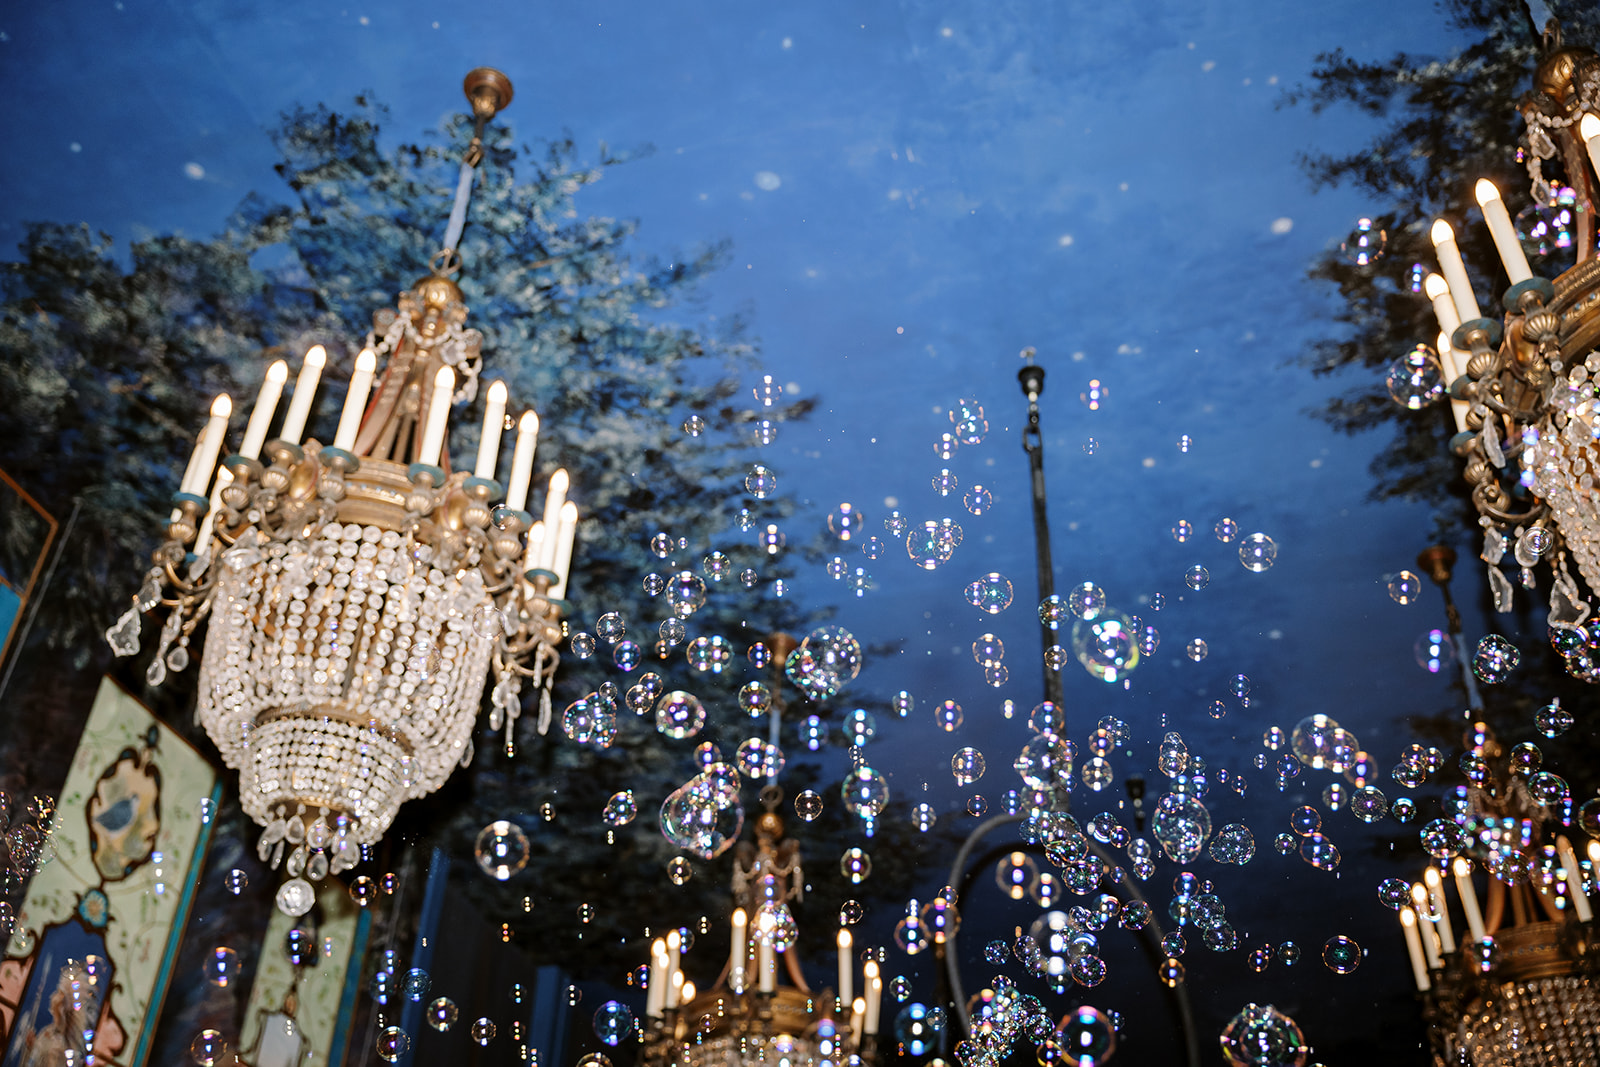 ceiling at the ruins wedding venue with crystal chandeliers and bubbles floating up